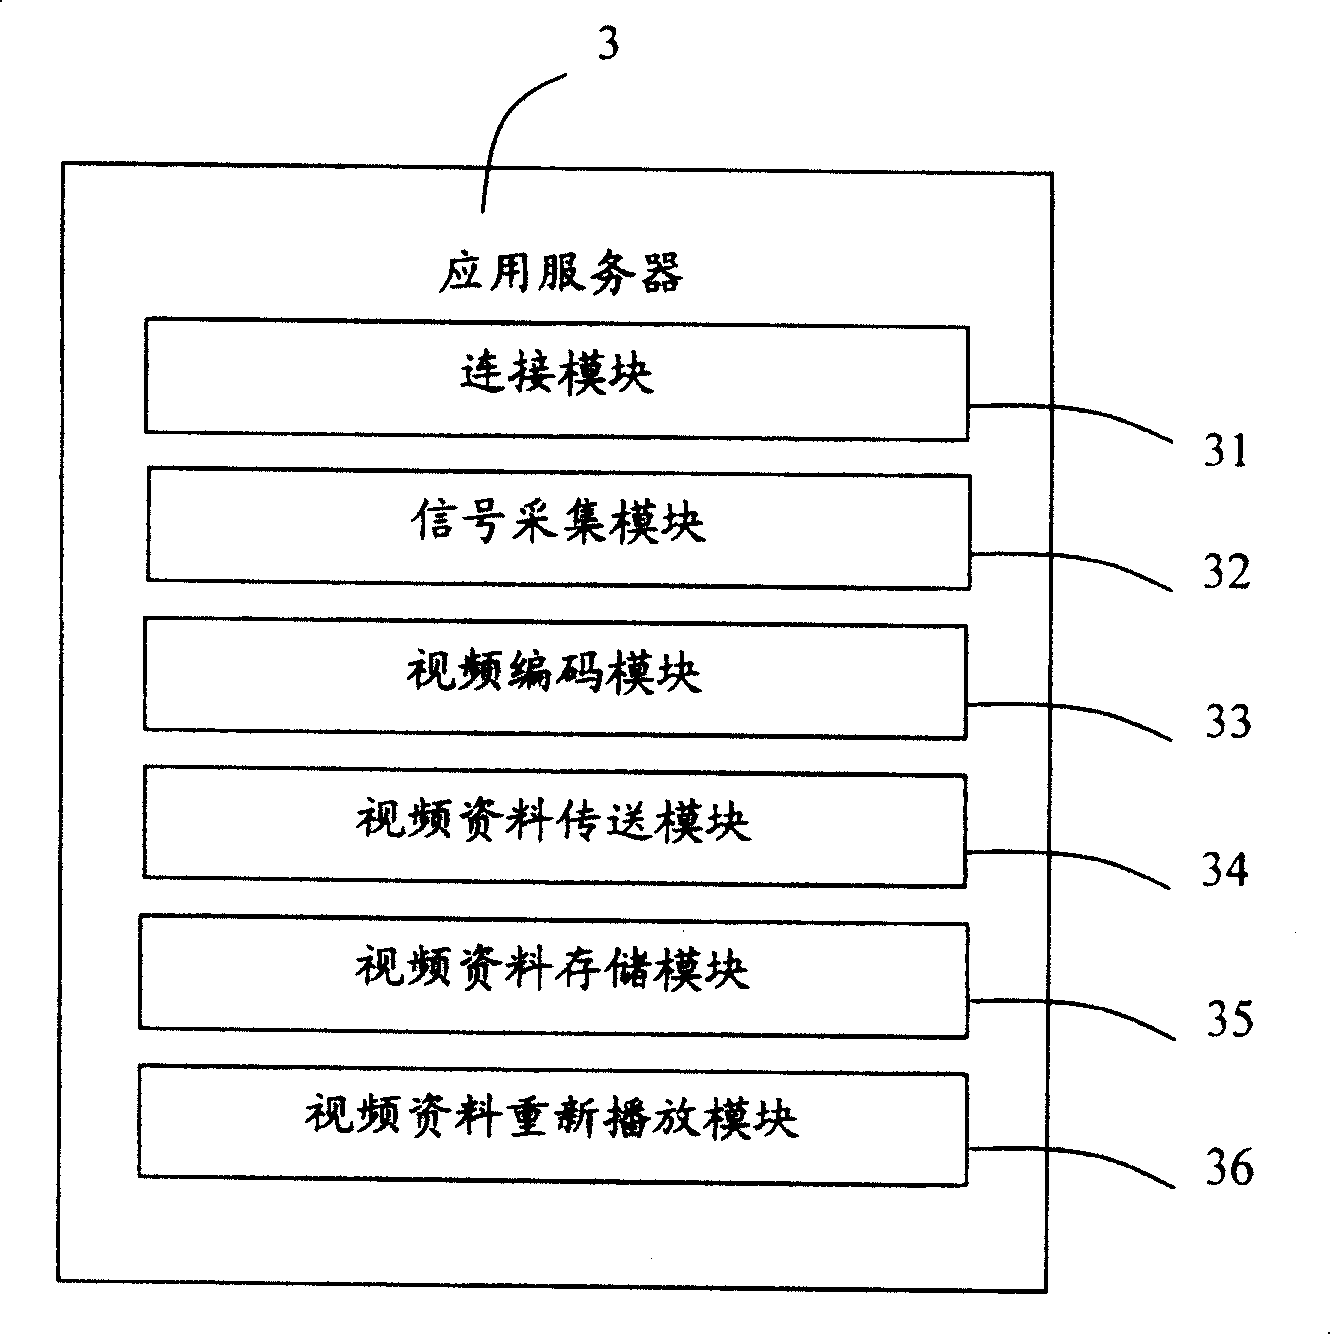 Network video data replay system and method